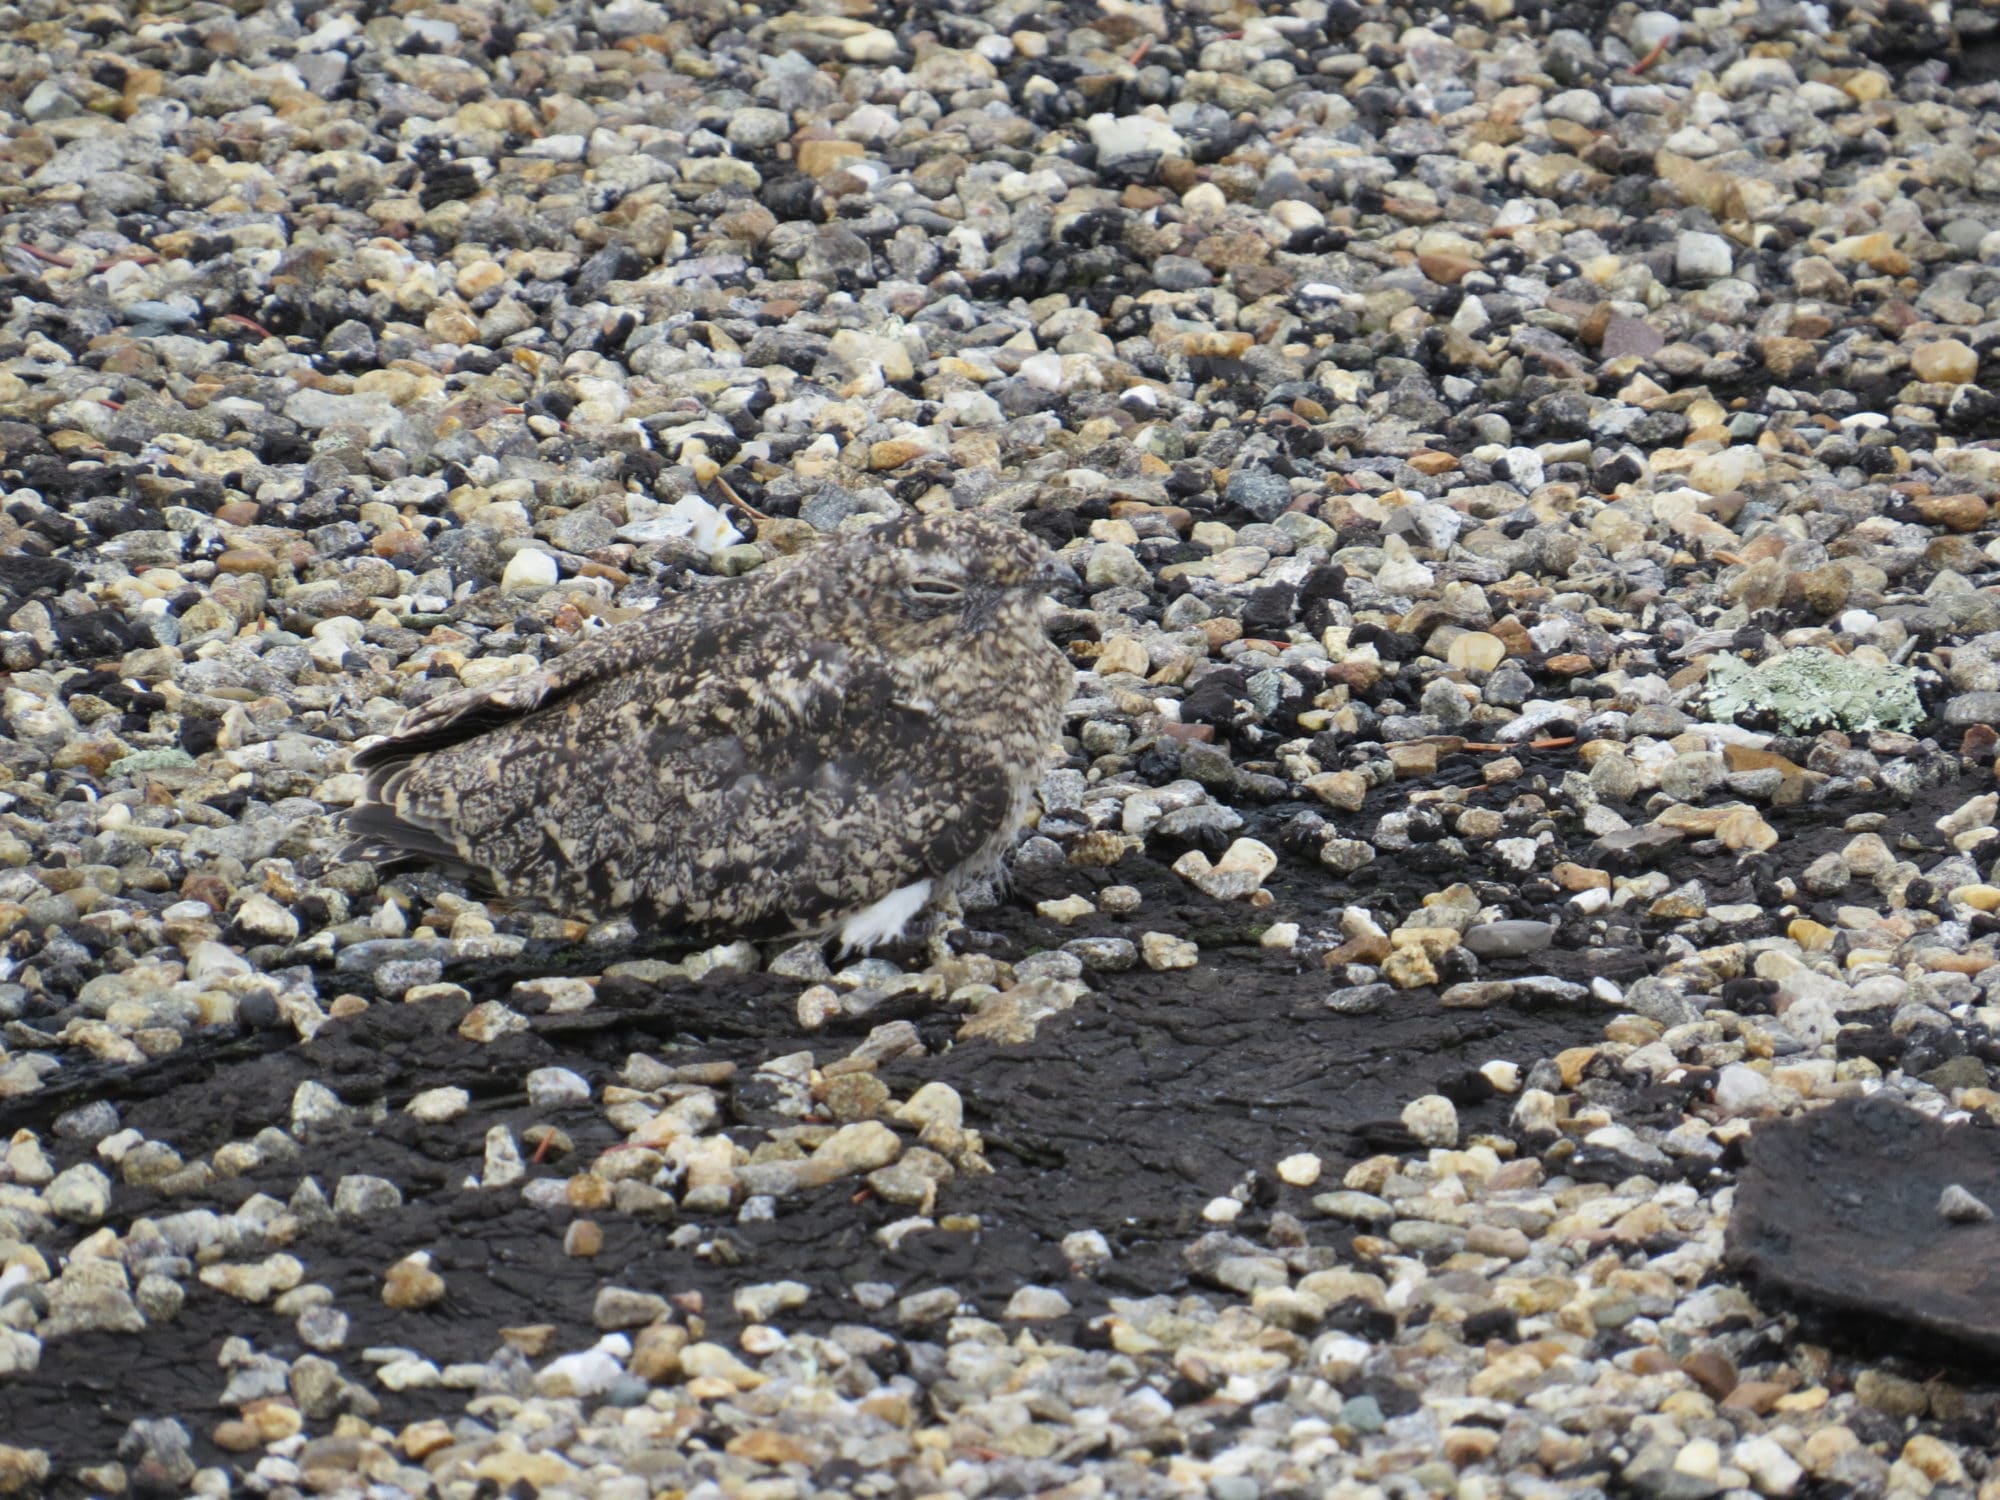 A nighthawk chick impersonates gravel on a rooftop on Concord. (photo © Becky Suomala)